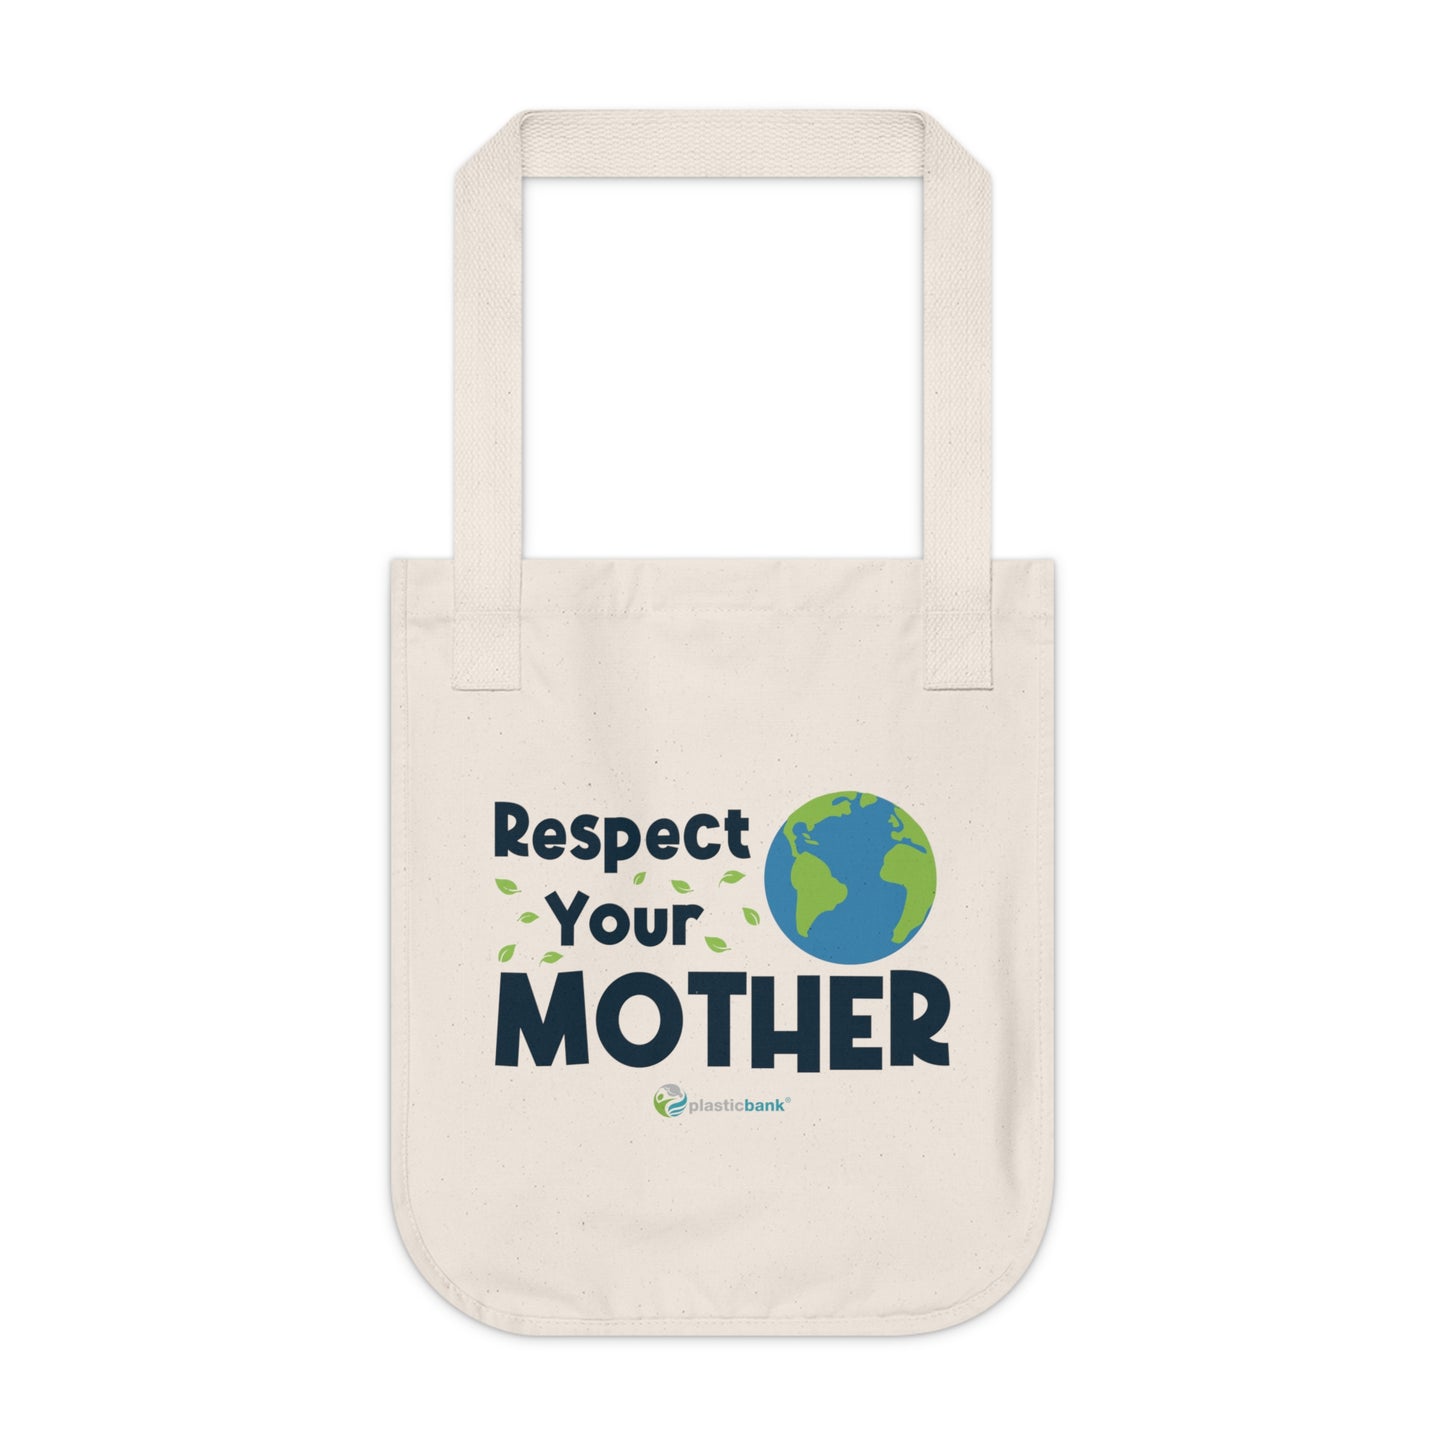 Respect Your Mother Tote Bag